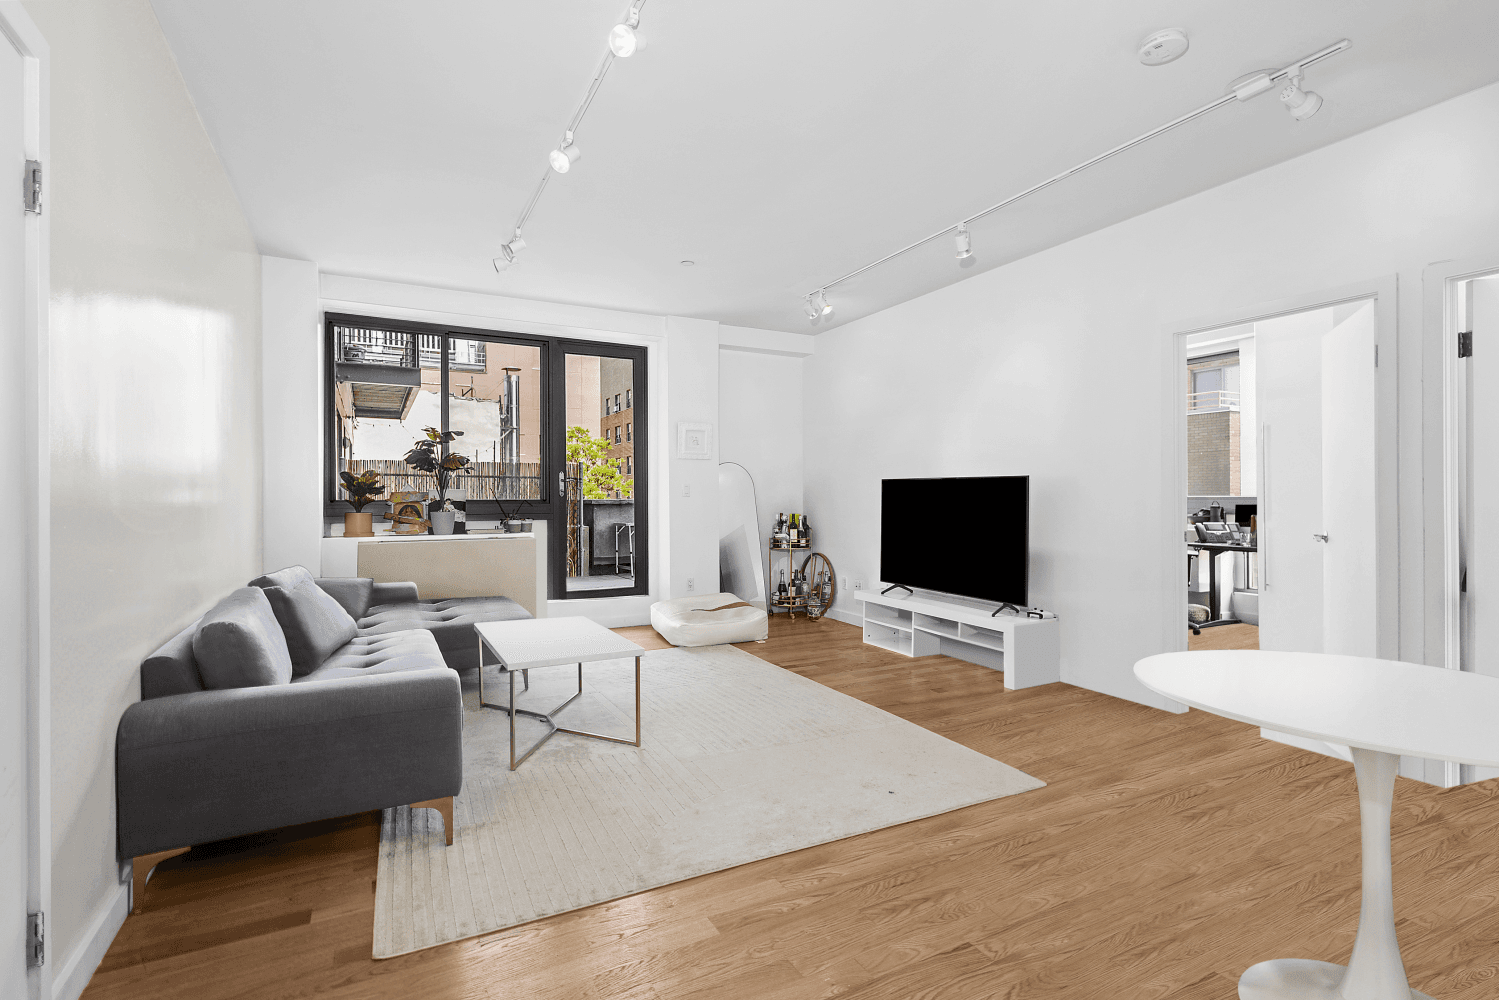 Welcome to 38 Delancey, where luxury and comfort intertwine in this exceptional 2 bedroom corner apartment.